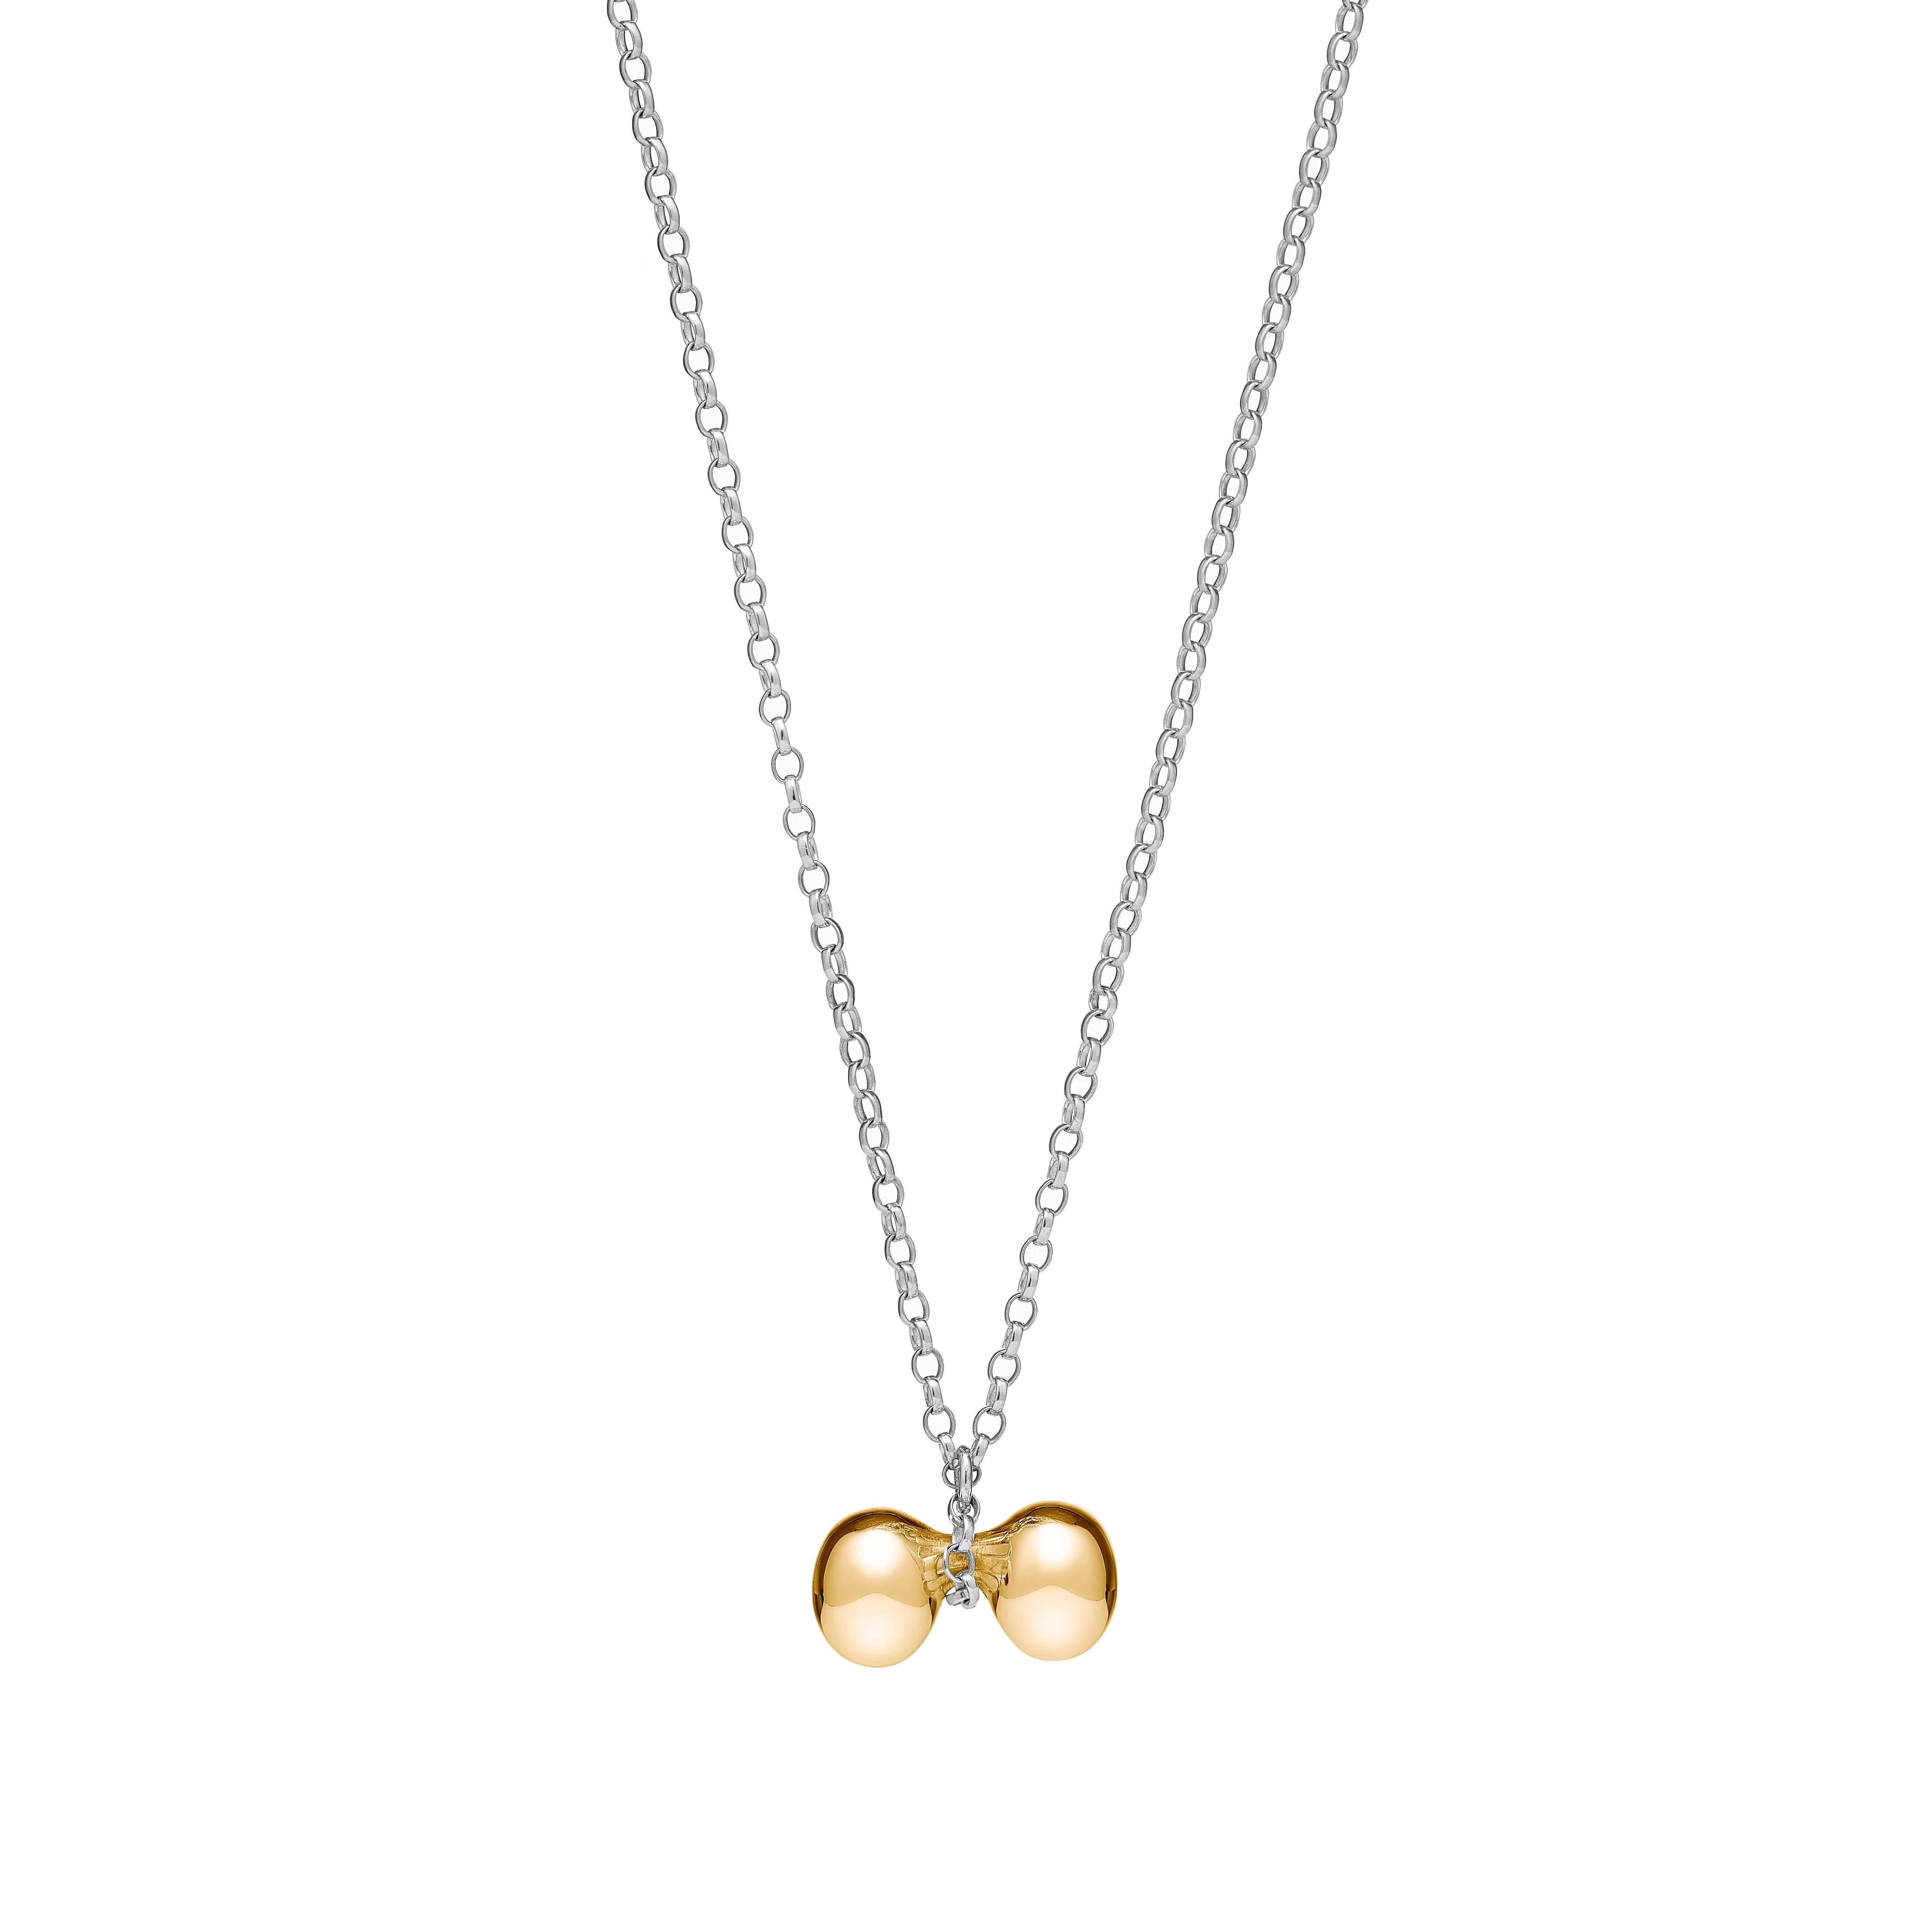 Golden Ballz Vermeil Silver Pendant on Fine Chain with Magnetic Clasp For Sale